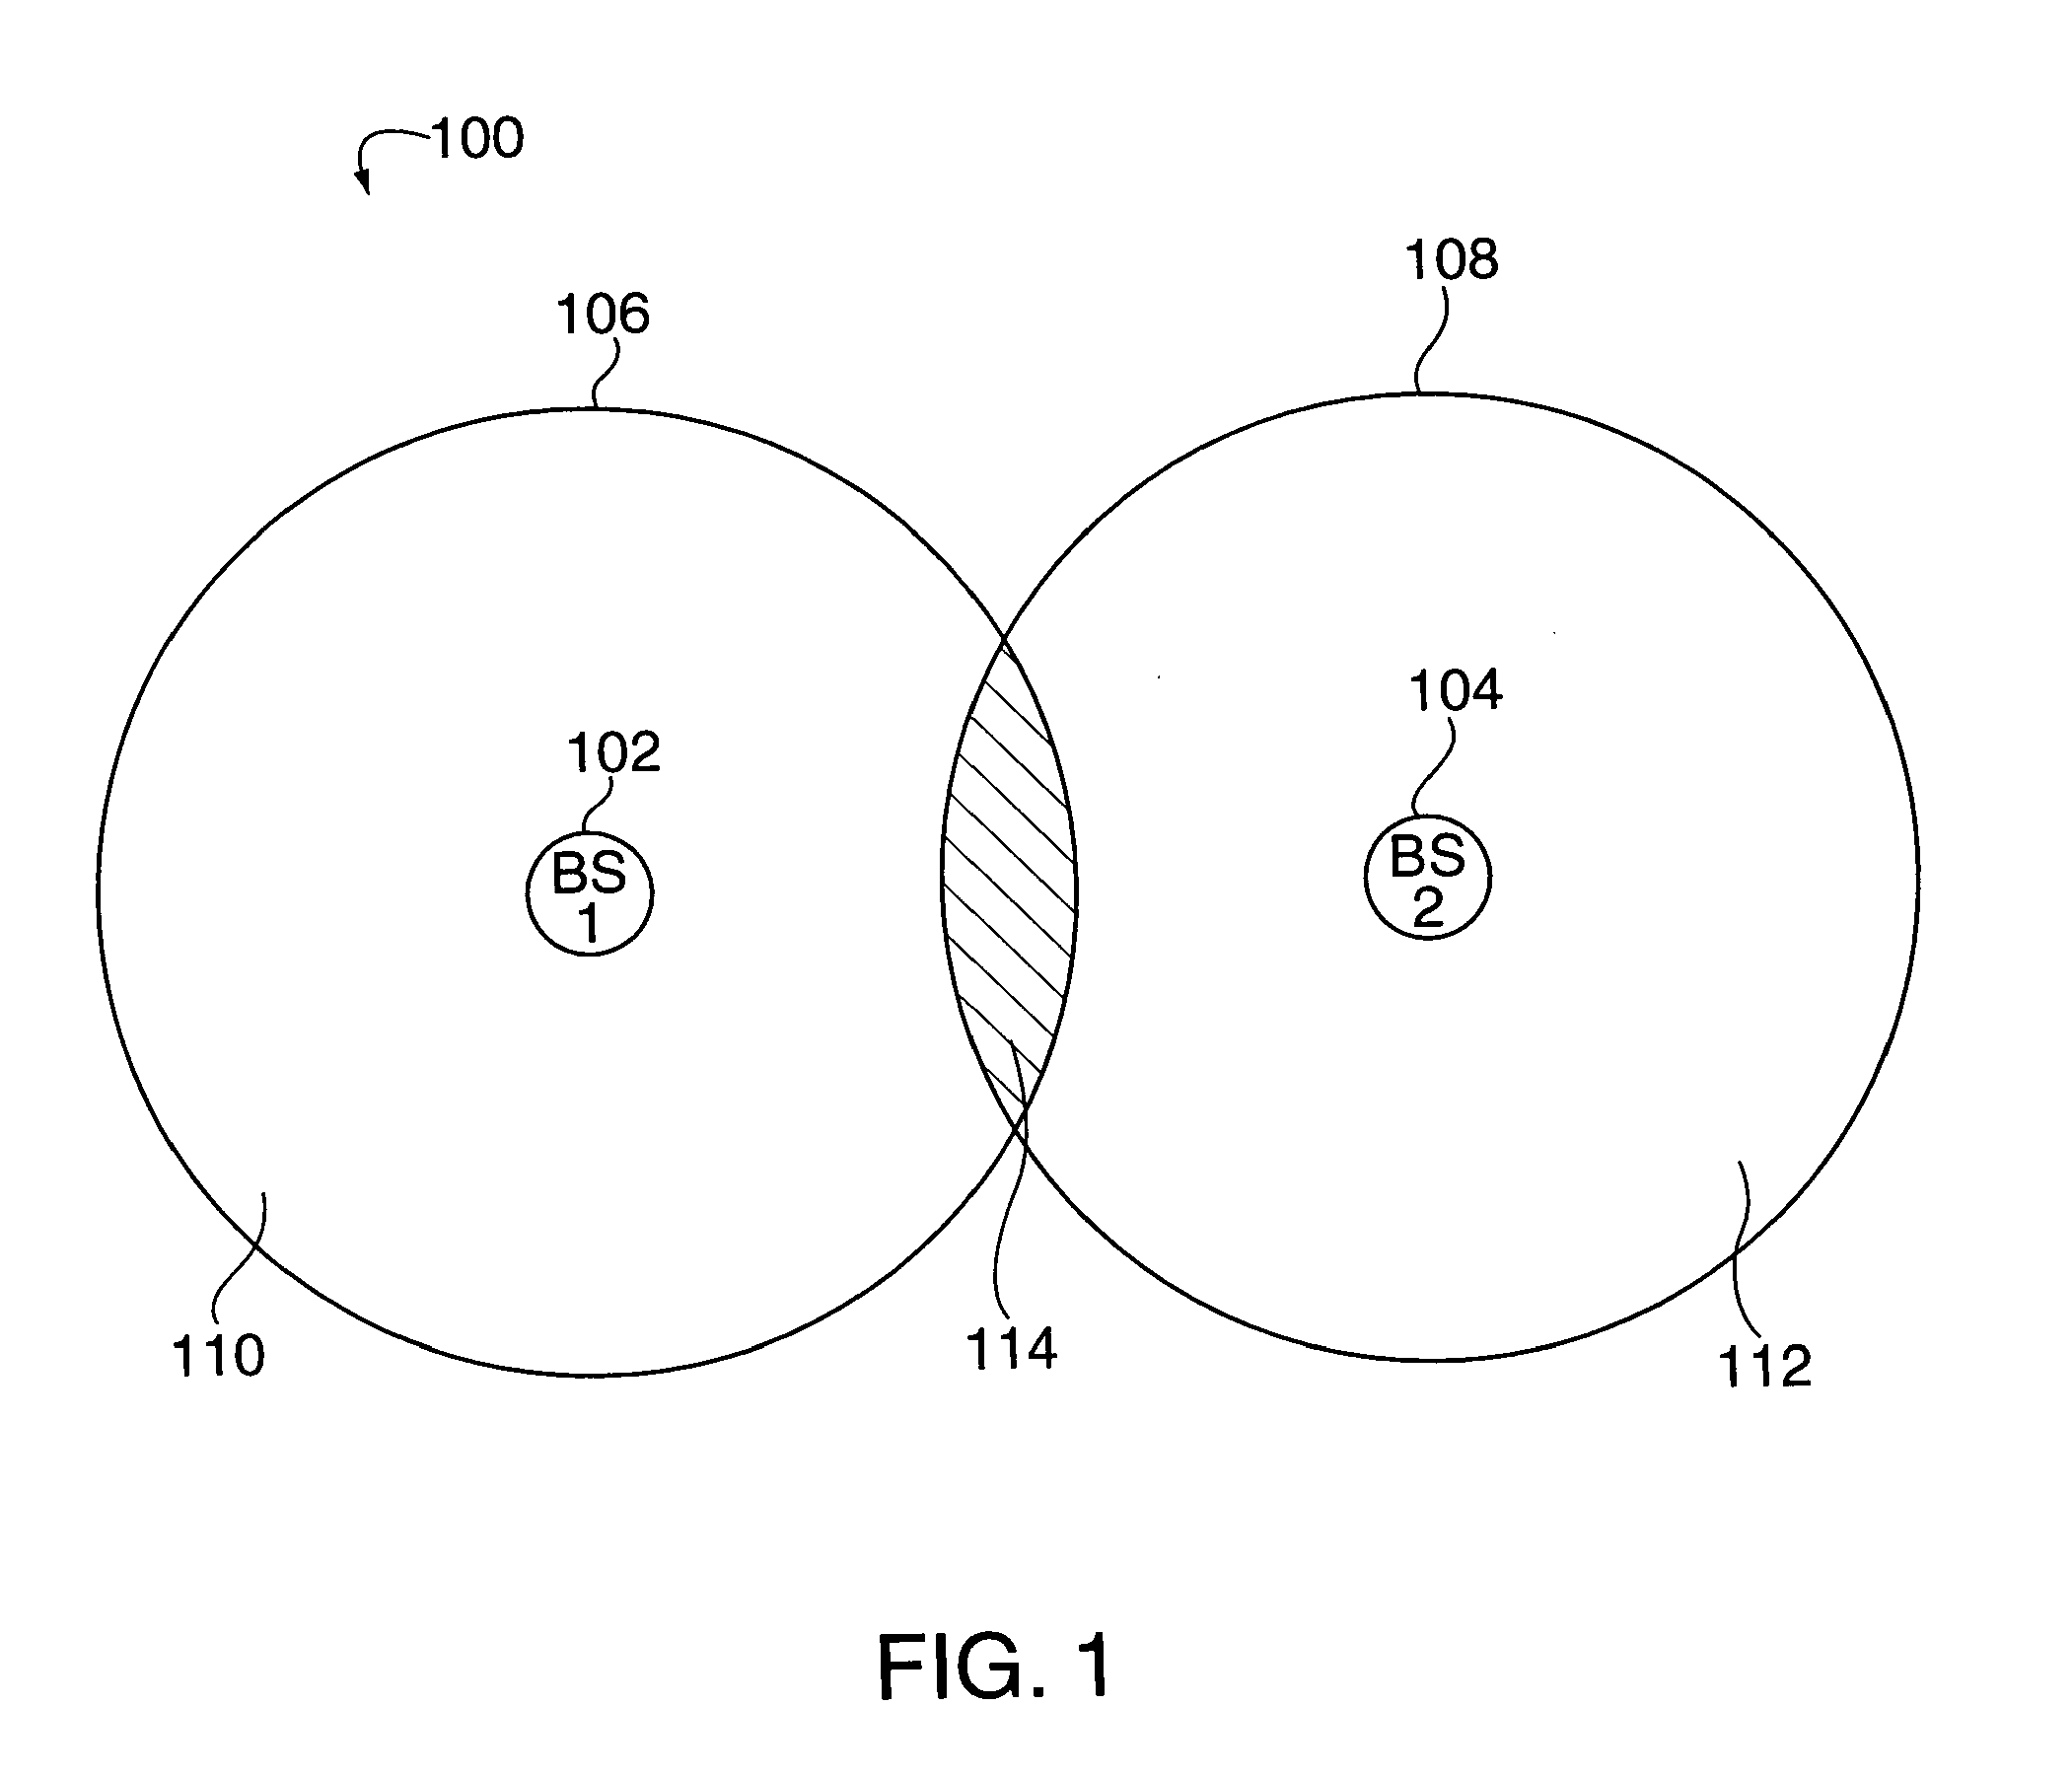 Method of creating and utilizing diversity in a multiple carrier communciation system